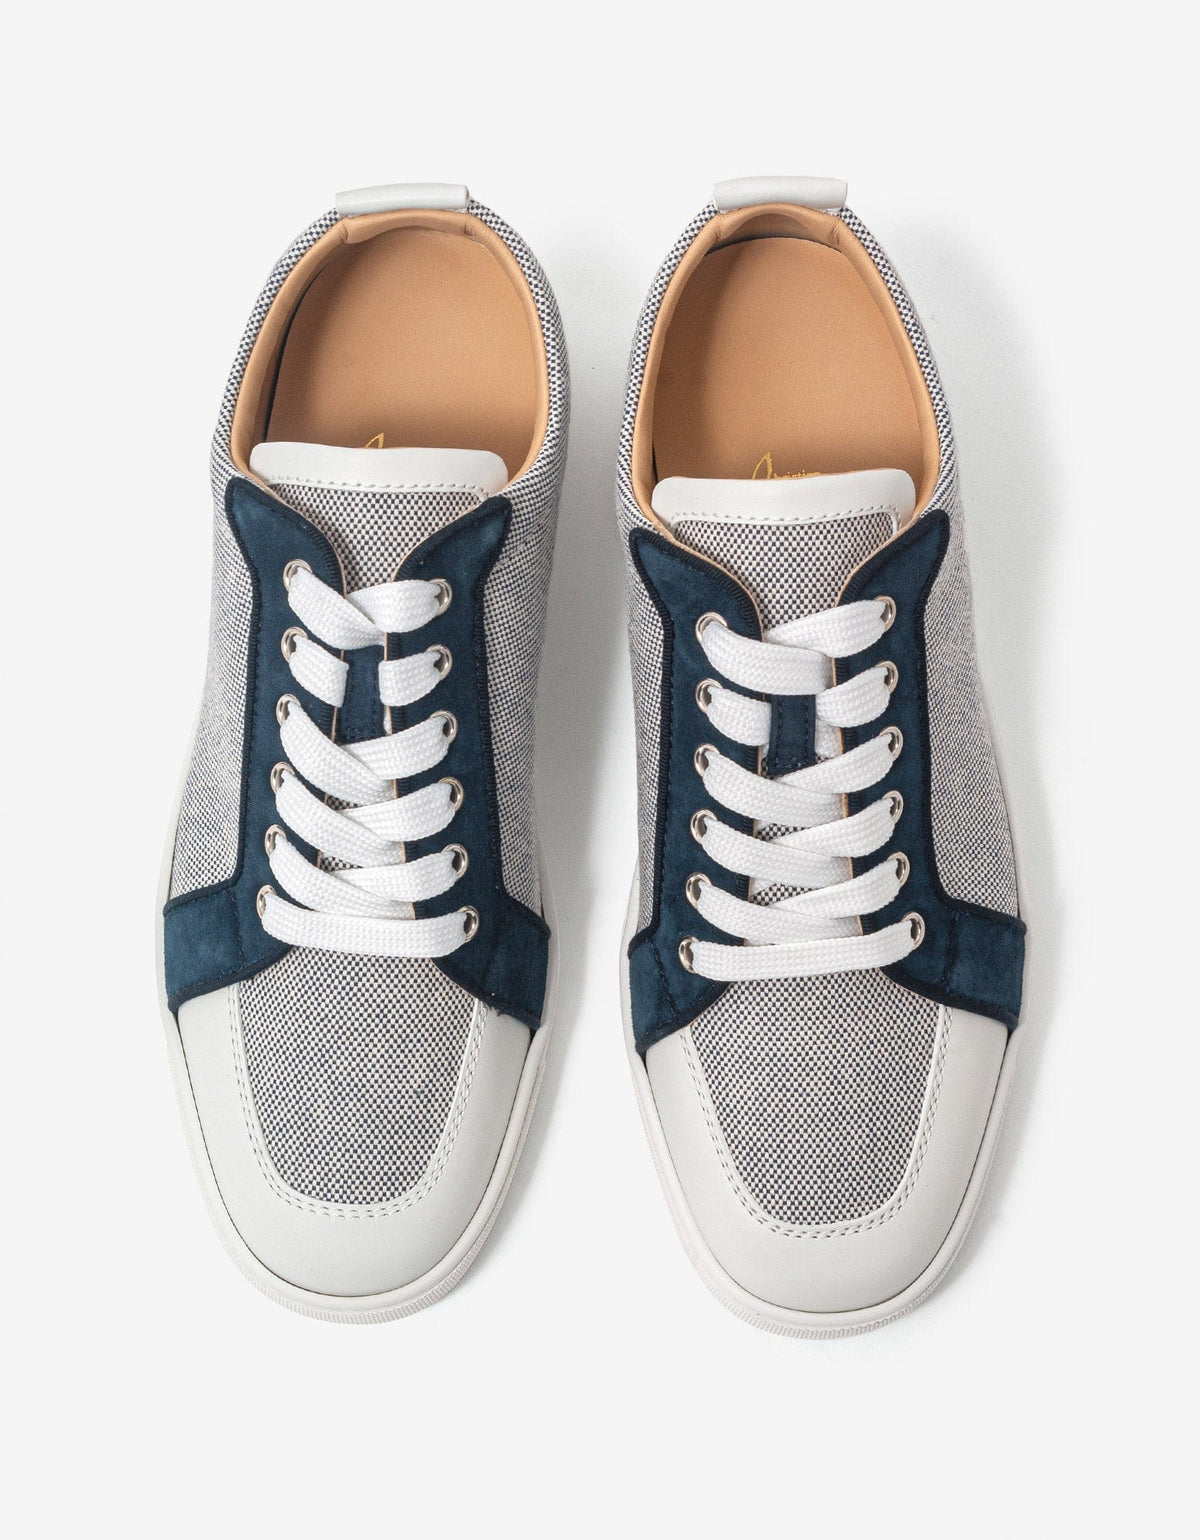 Christian Louboutin Rantulow Flat Navy Blue and & White Trainers -